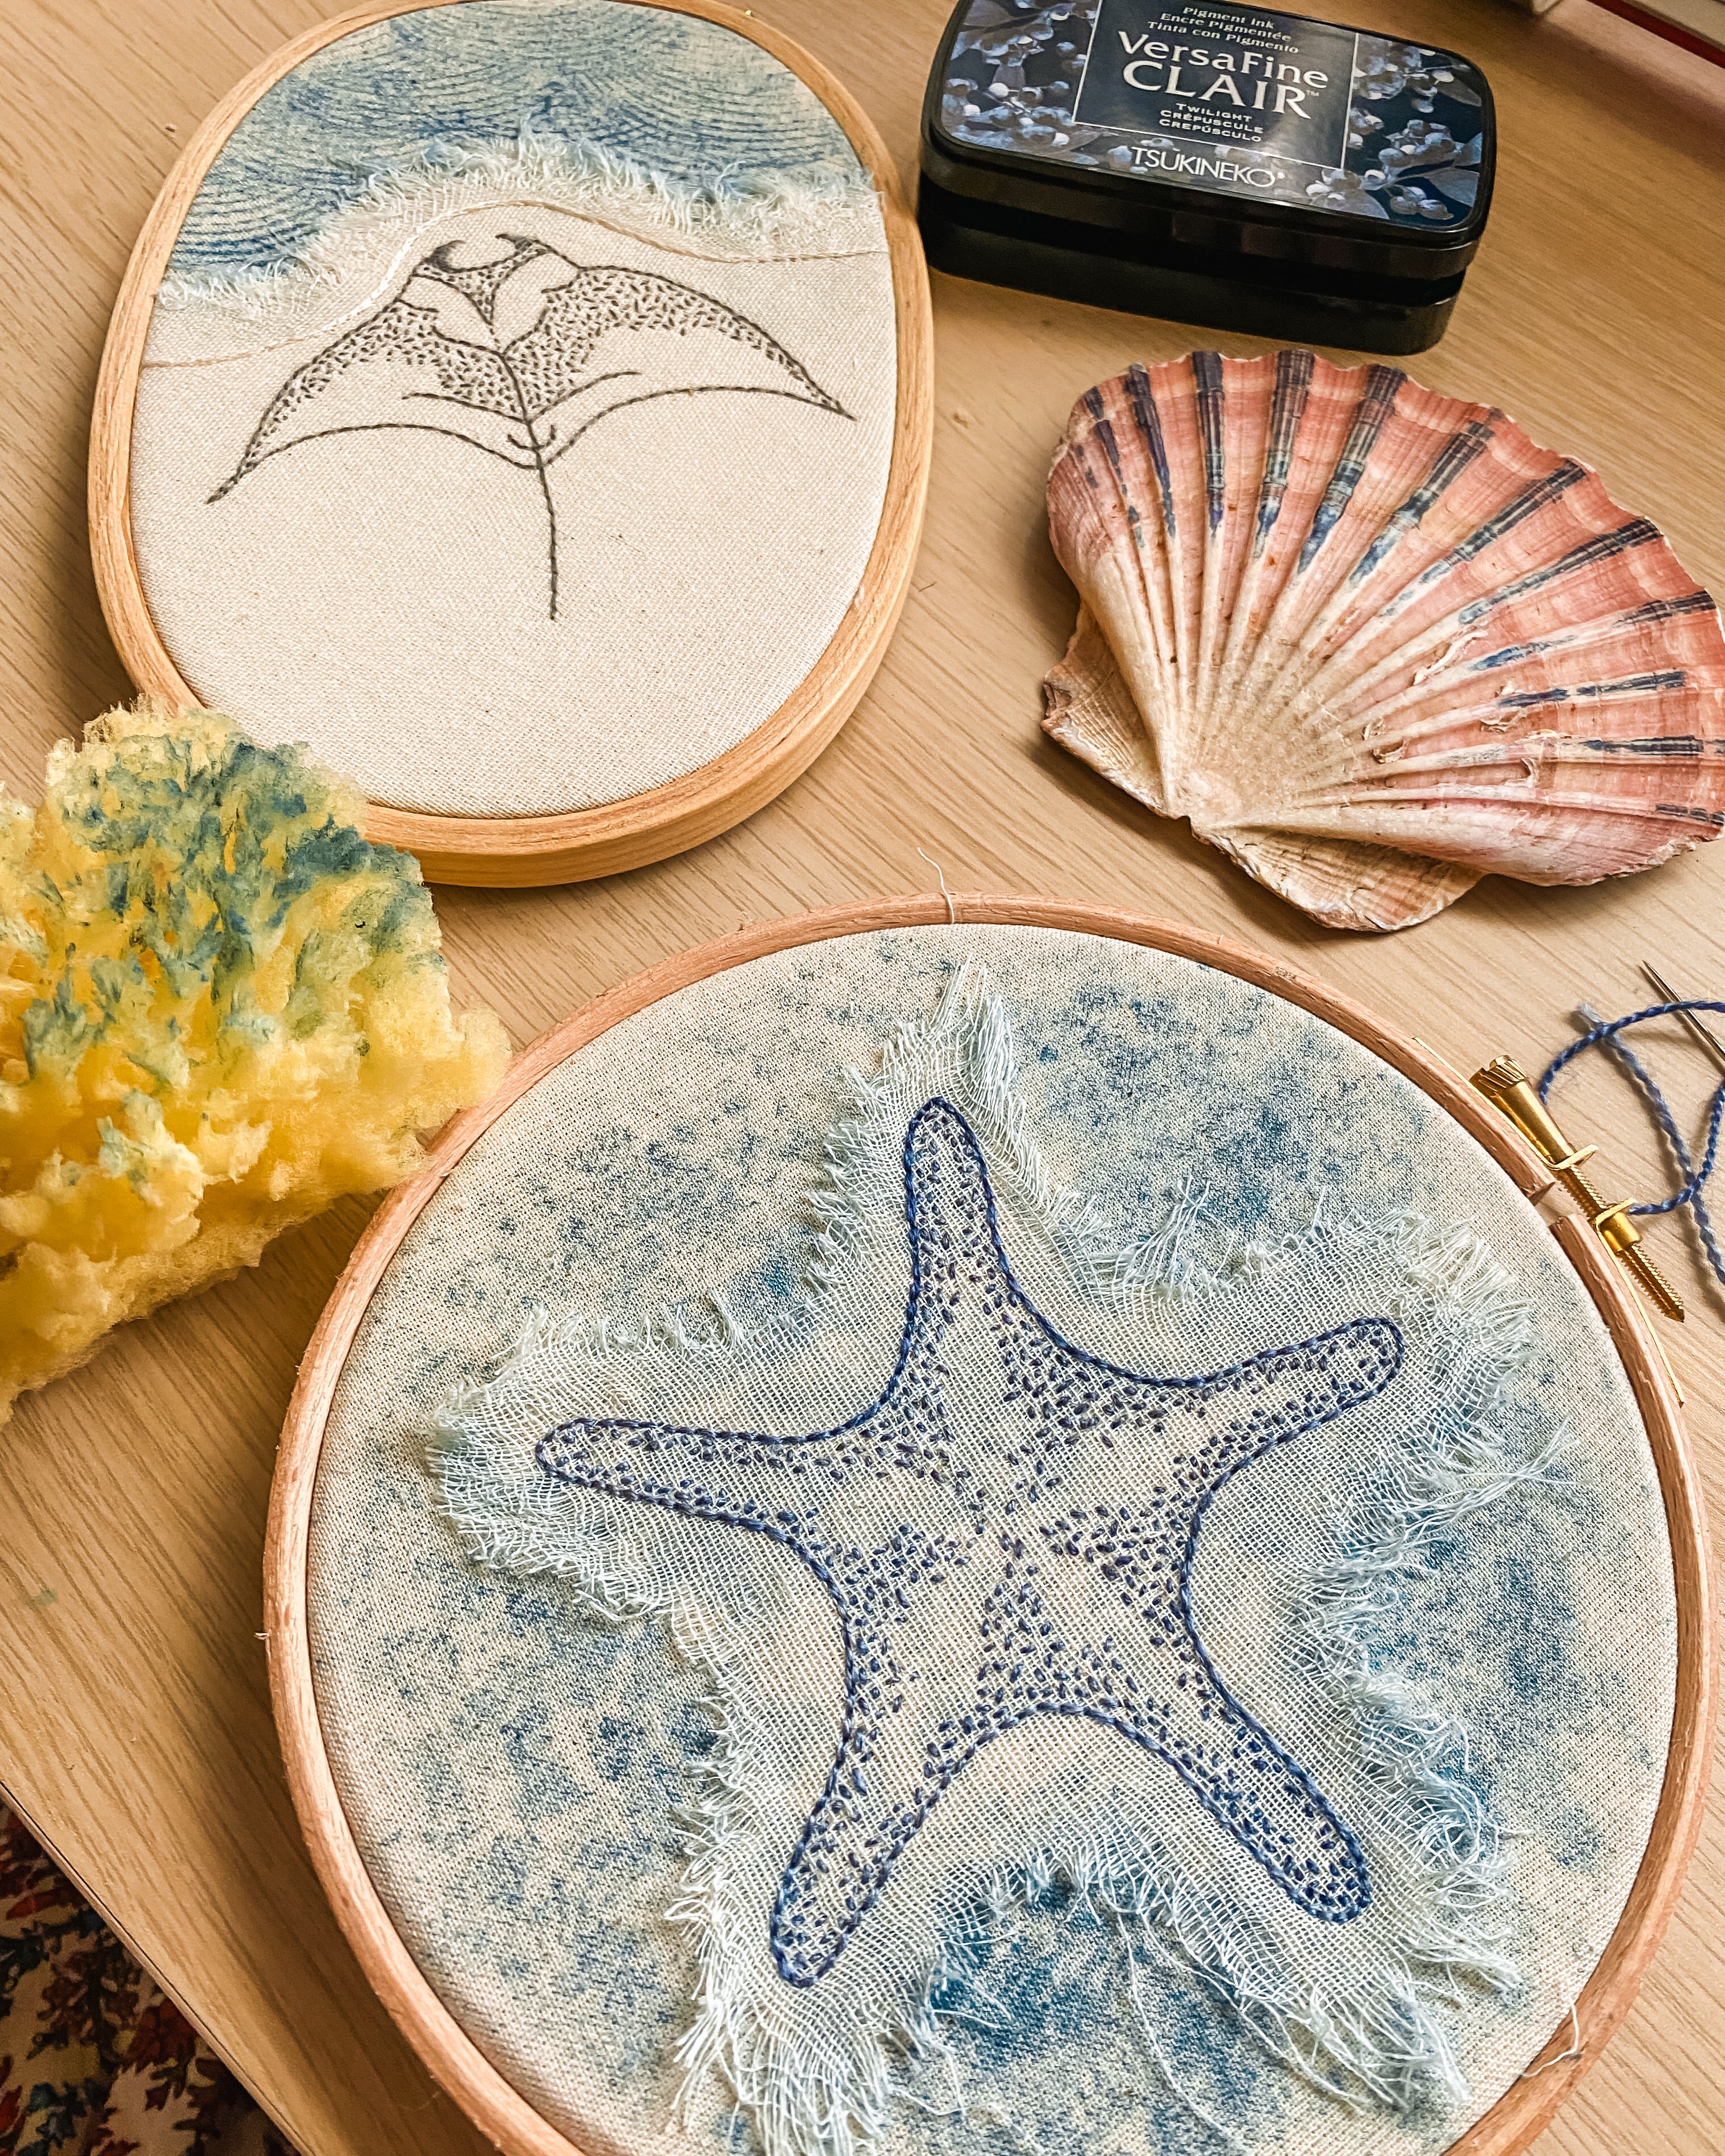 Private Beginners Embroidery Workshop - Request a date for your event!